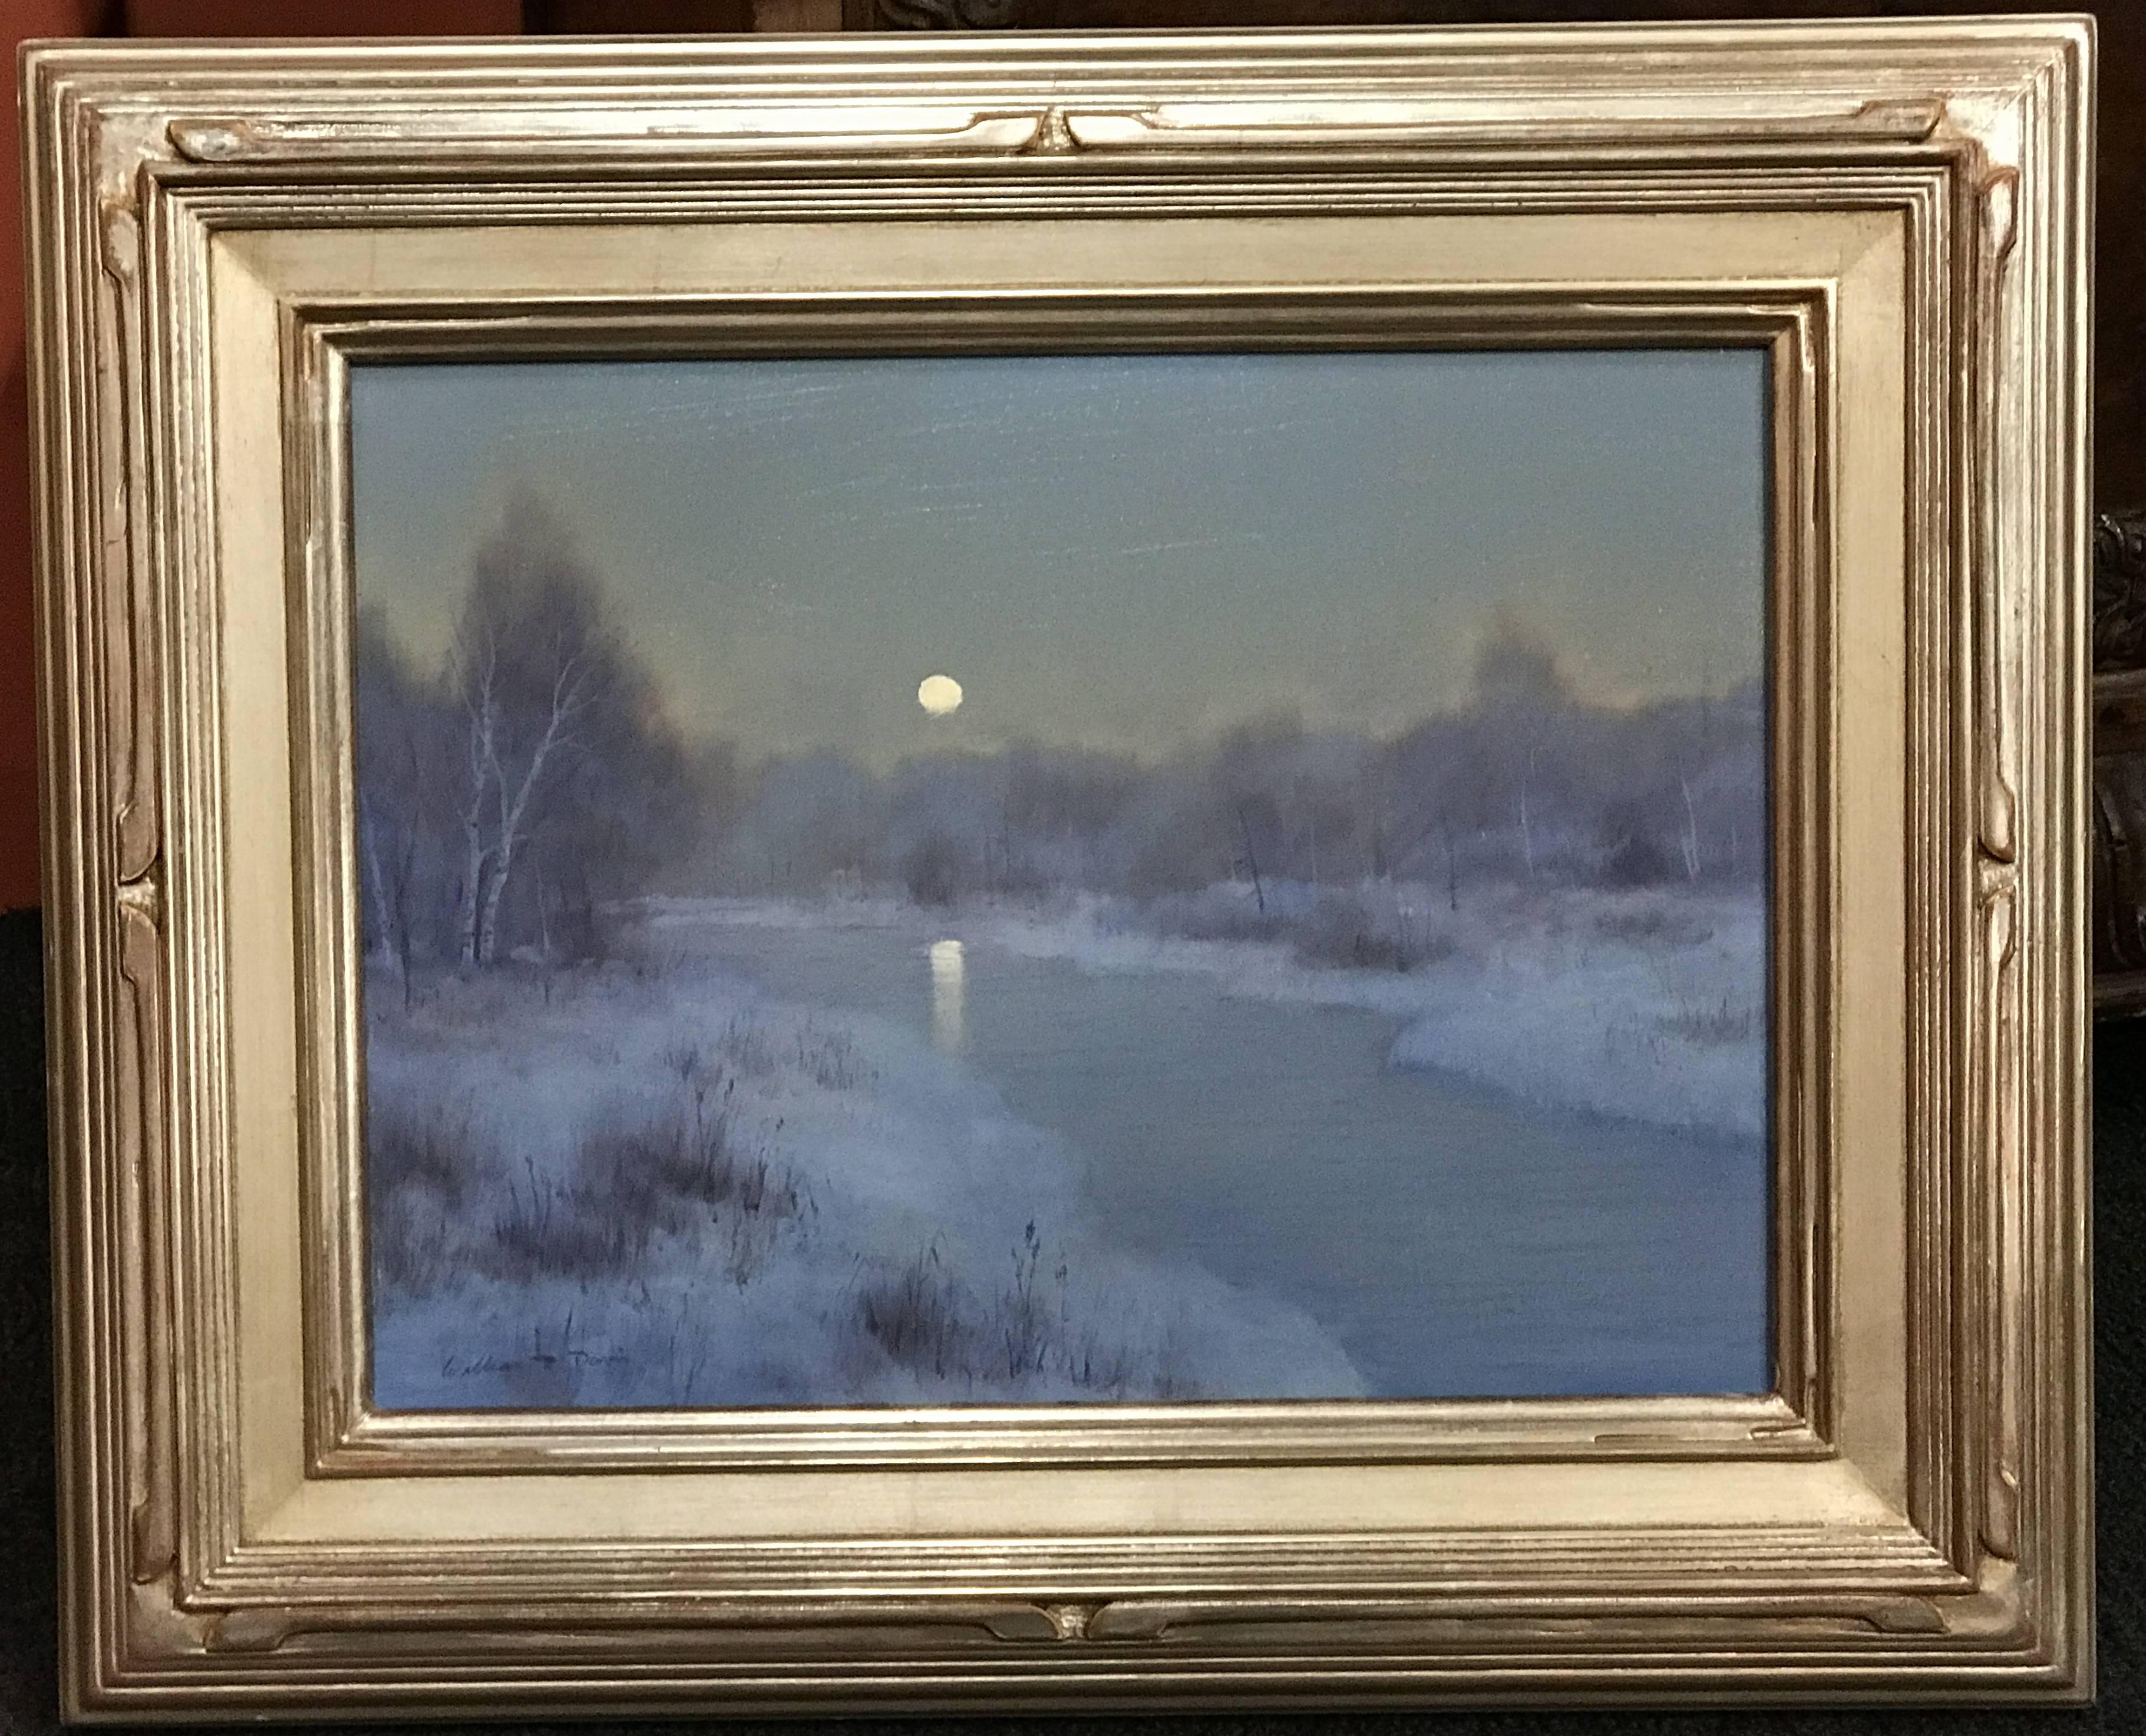 This tonalist winter landscape oil painting was painted by American artist William R. Davis (1952). Davis was born in Somerville, Massachusetts, grew up in Hyannis Port, MA and became well-known in New England and across the country as a self-taught